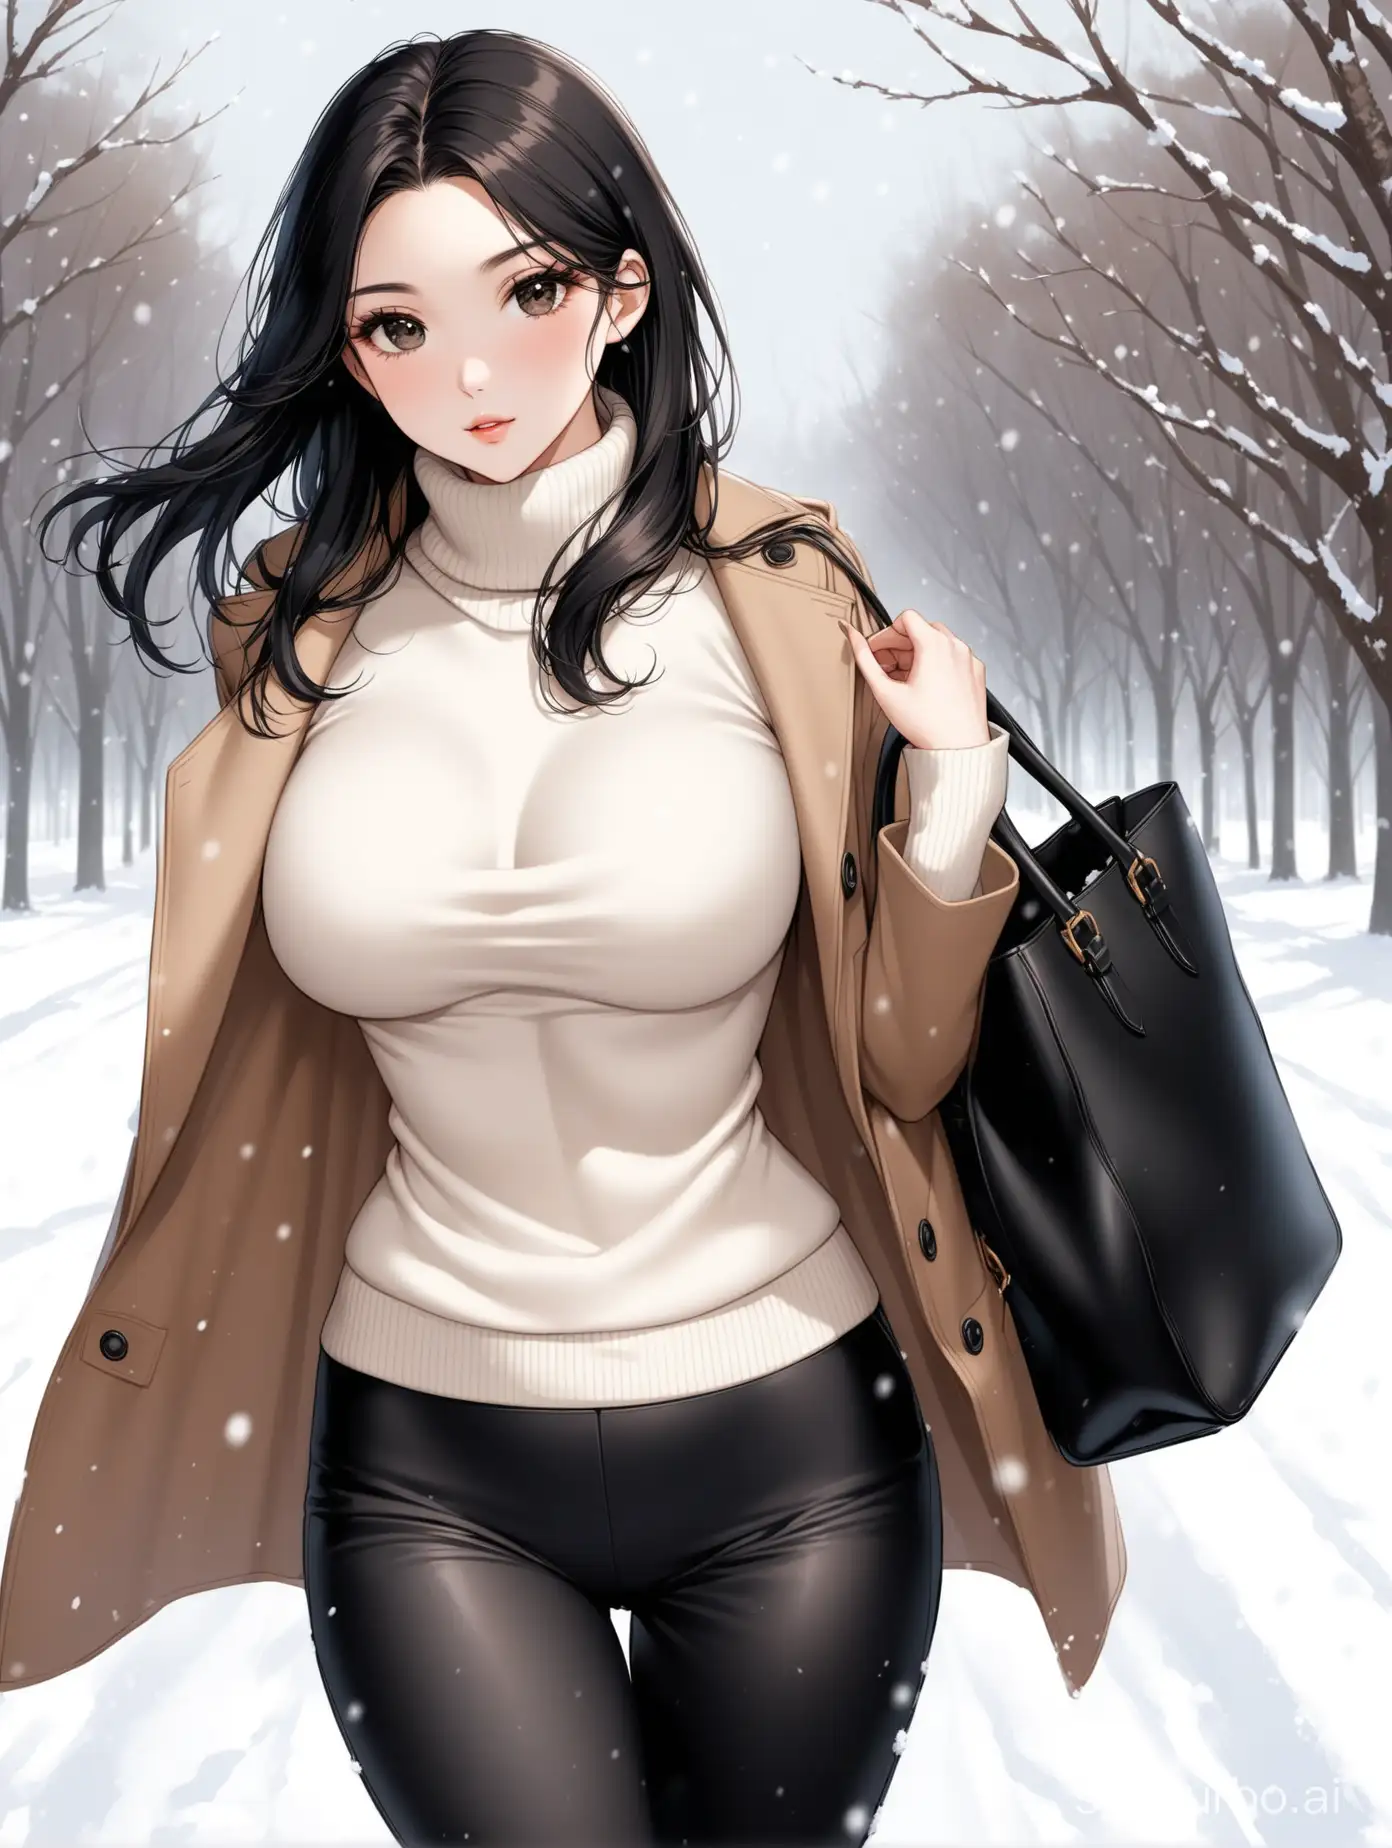 A beautiful woman, delicate features, exquisite appearance, perfect figure, perfect proportions, dense and thick medium-length black hair, fine black eyes, stunning appearance, large chest, narrow waist, wide hips, wearing a white turtleneck sweater, with a brown cashmere medium-length coat on the outside, black cashmere trousers, carrying a black leather bag on her shoulder, snow flying all around on a snowy day.